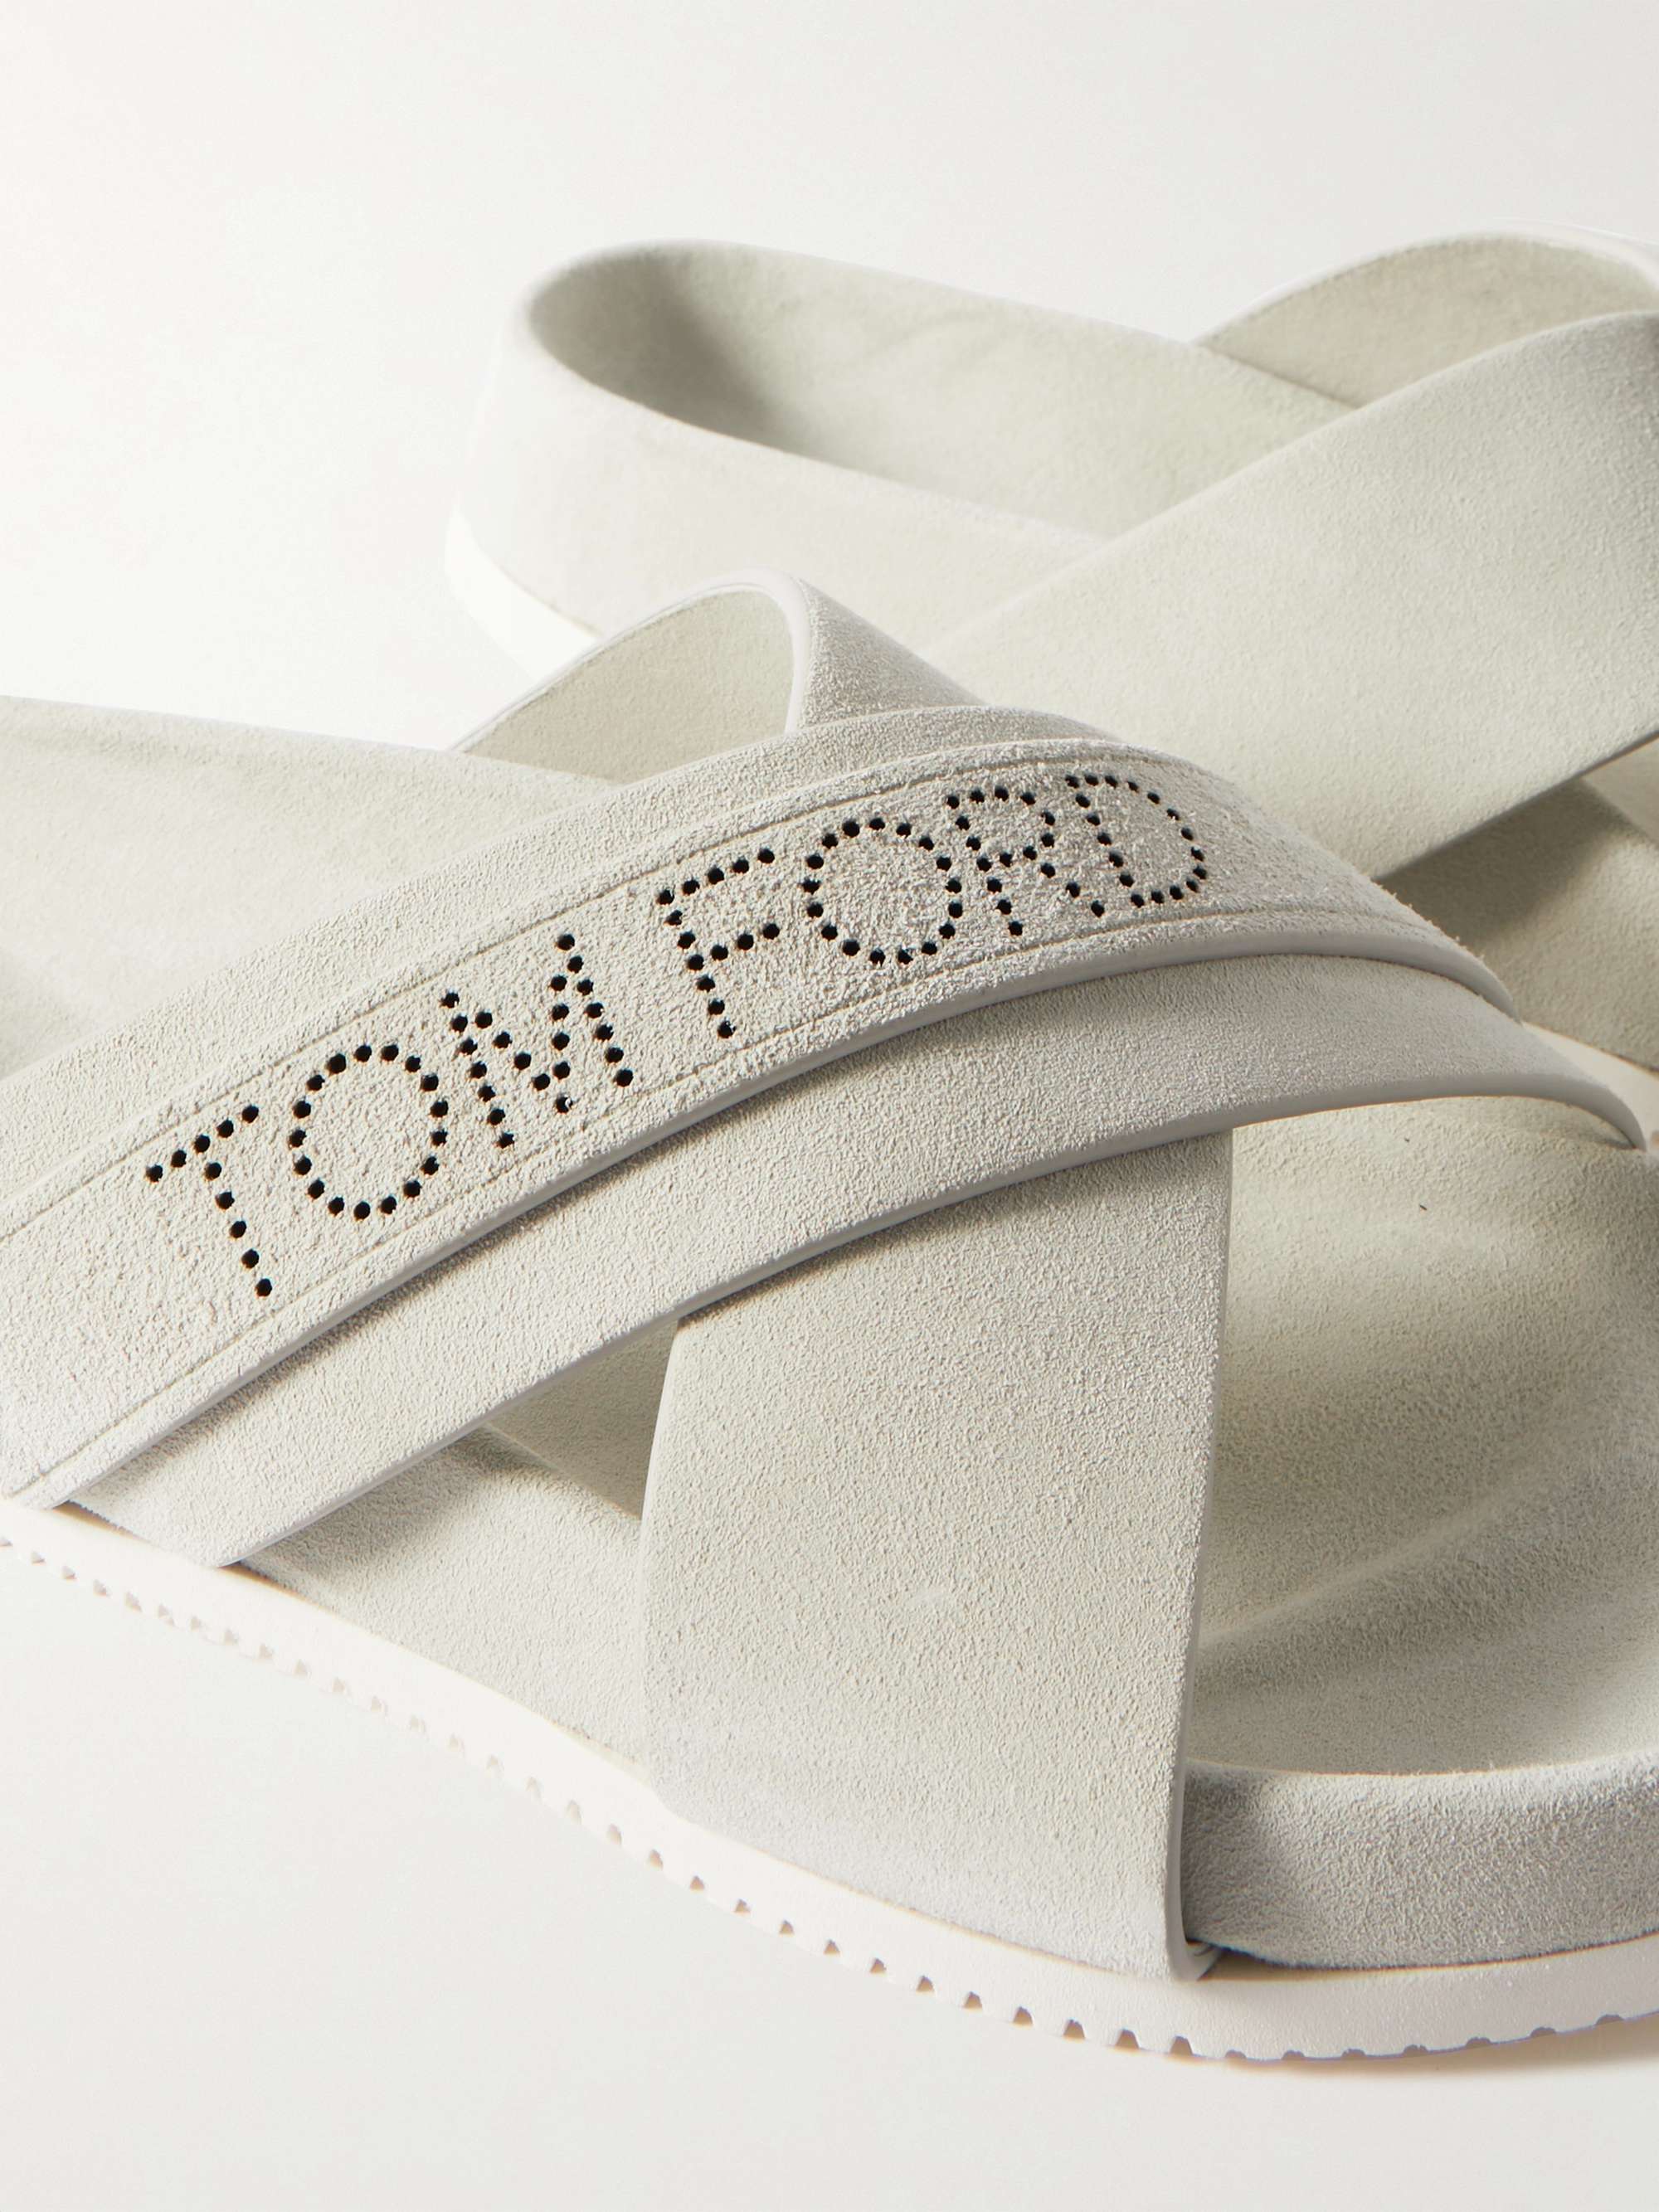 TOM FORD Wicklow Perforated Suede Slides